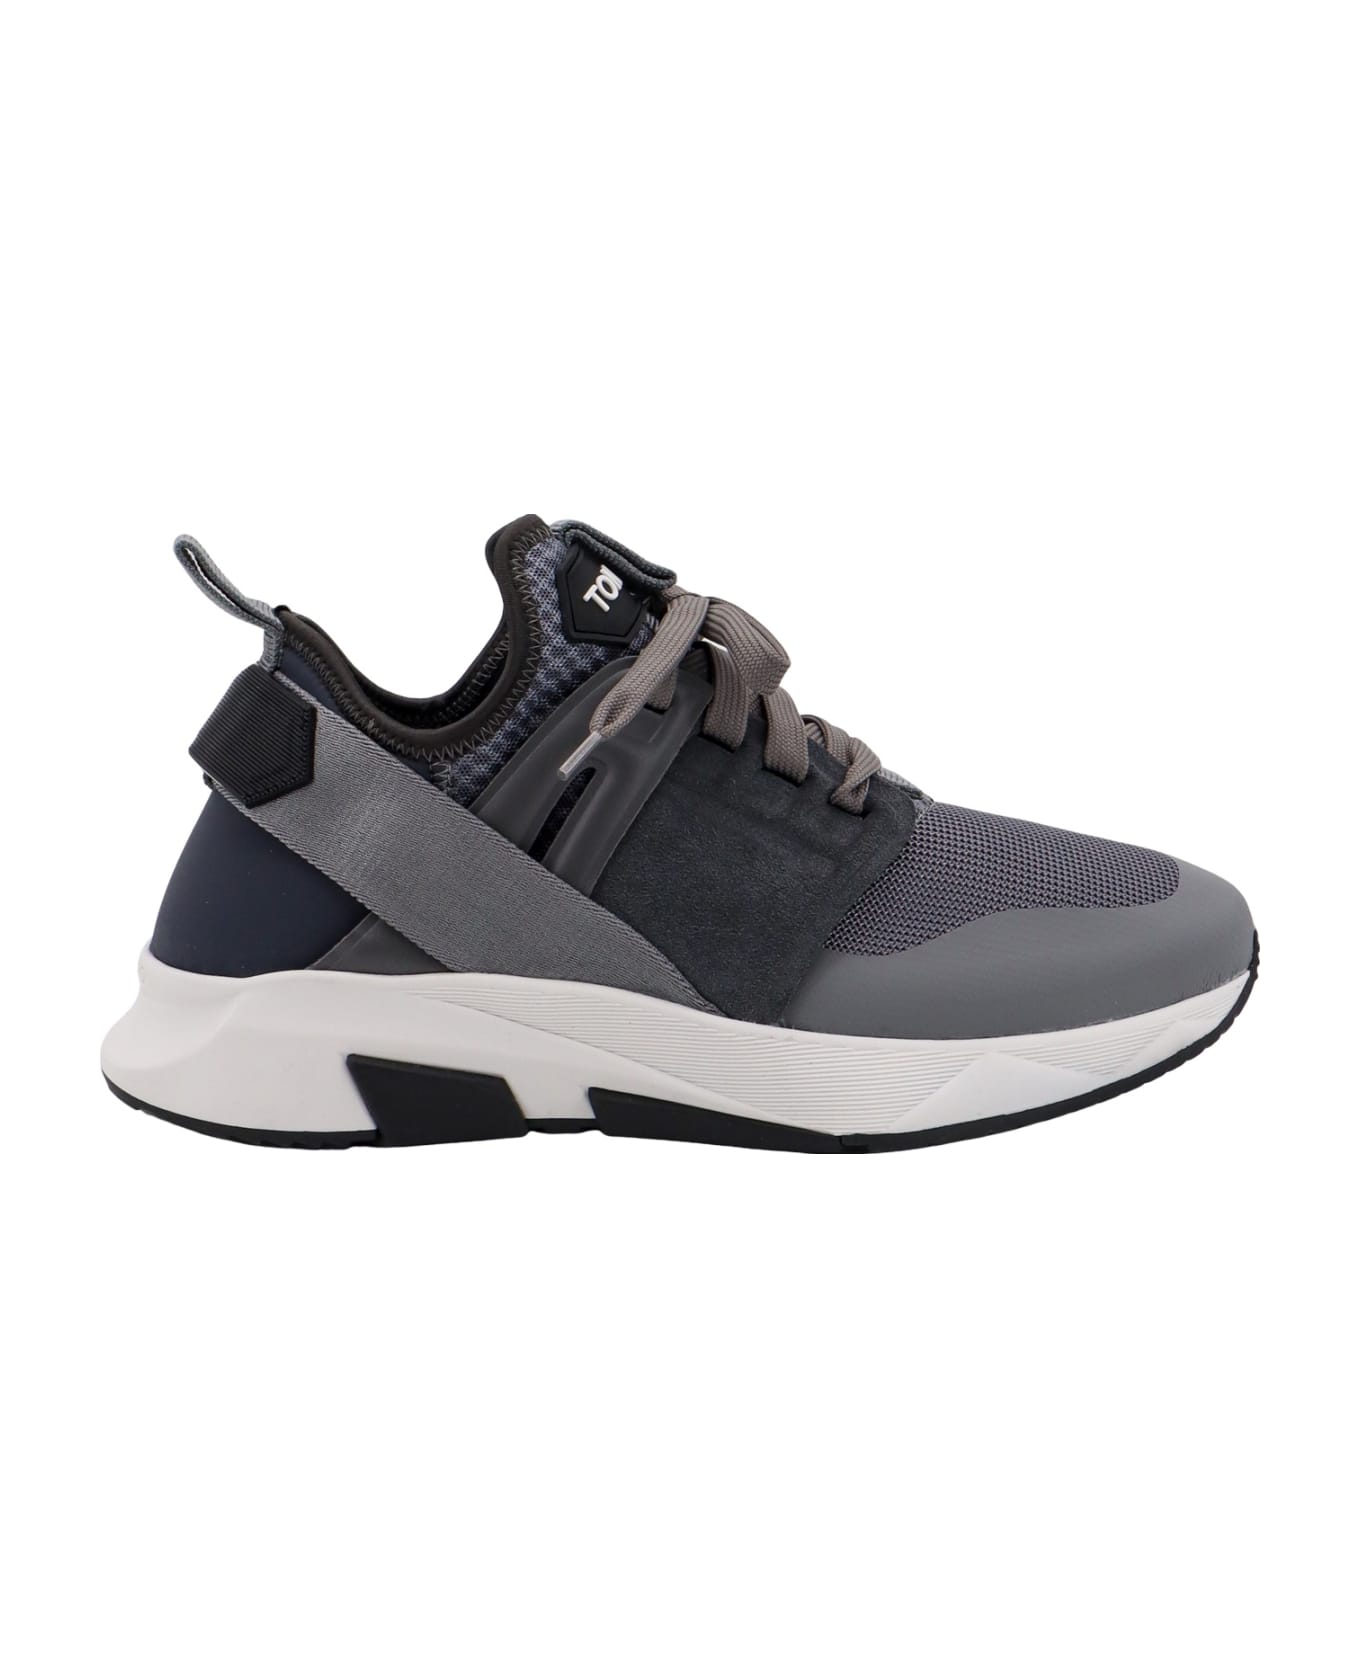 Tom Ford Jago Sneakers - Grey